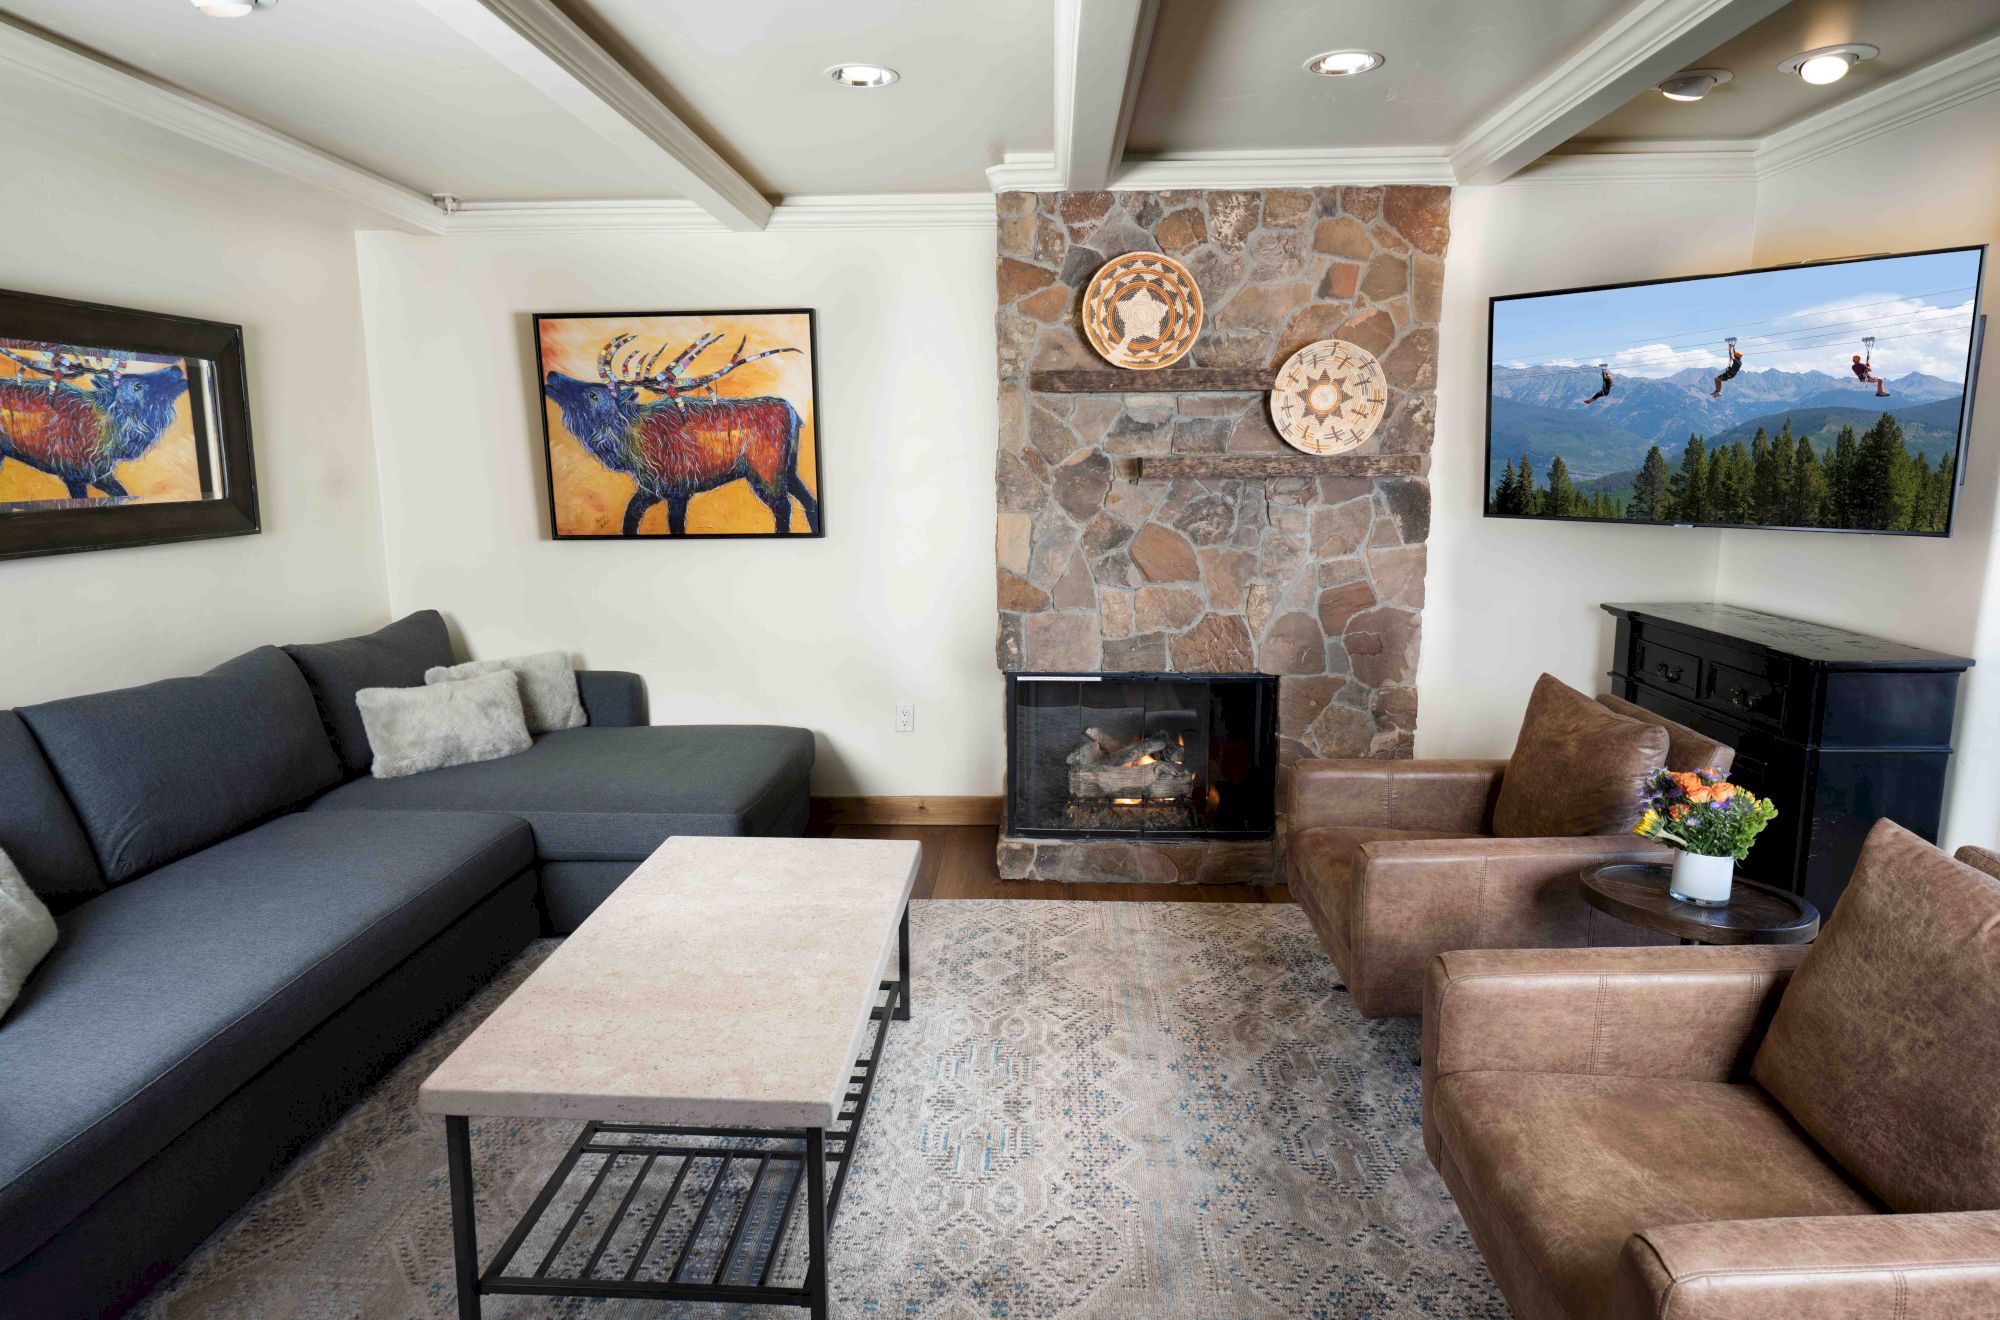 A cozy living room with a gray sectional sofa, two brown armchairs, a stone fireplace, artwork on walls, a coffee table, and a TV.